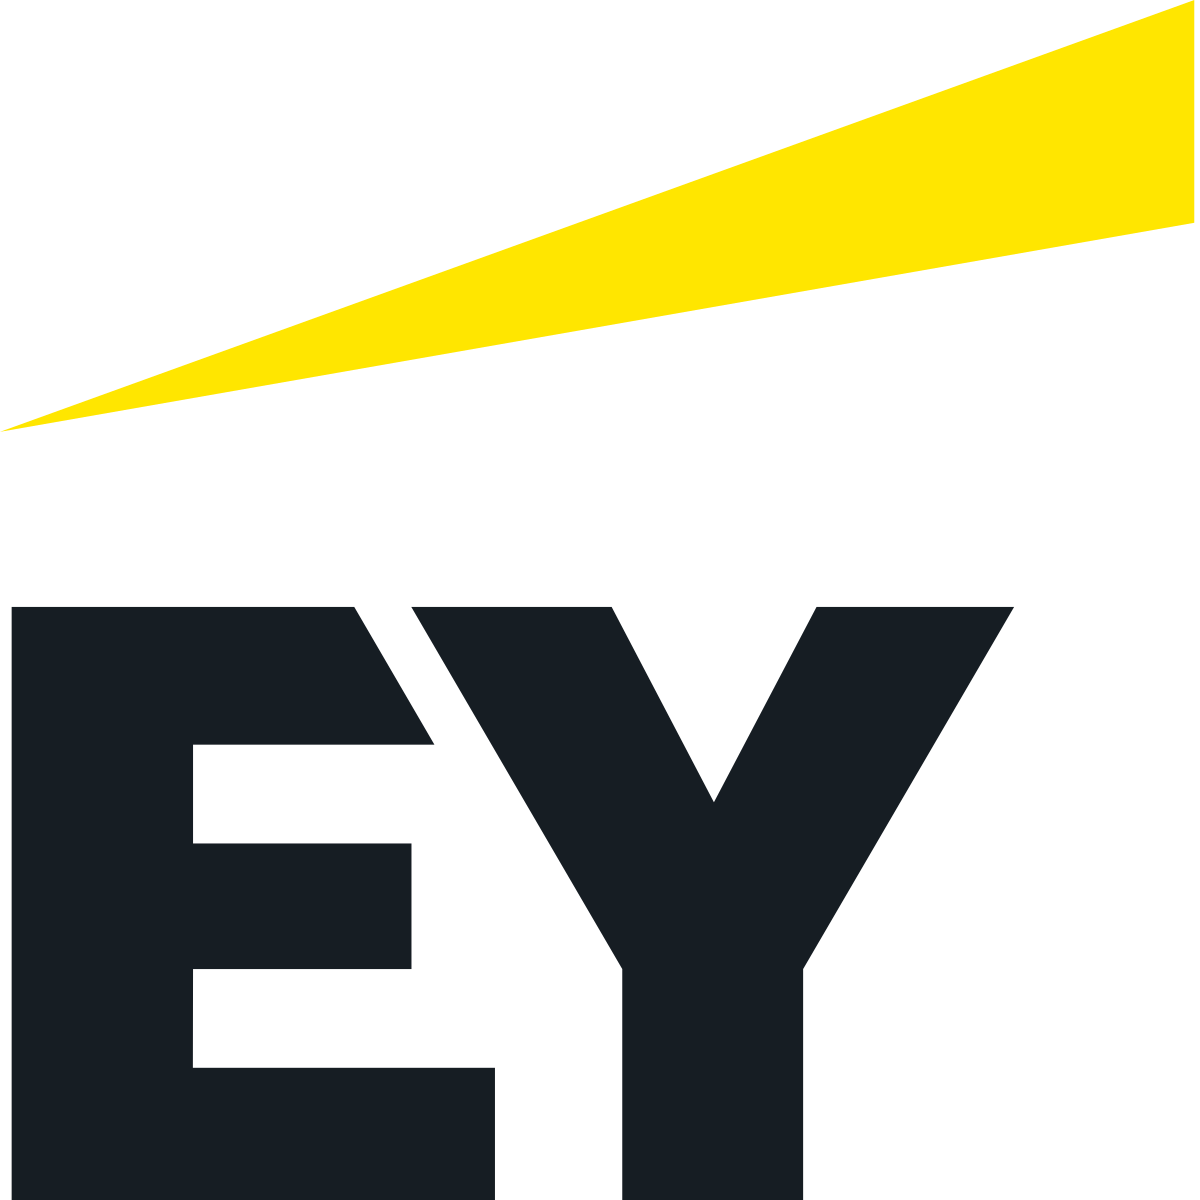 Logo of ERNST & YOUNG